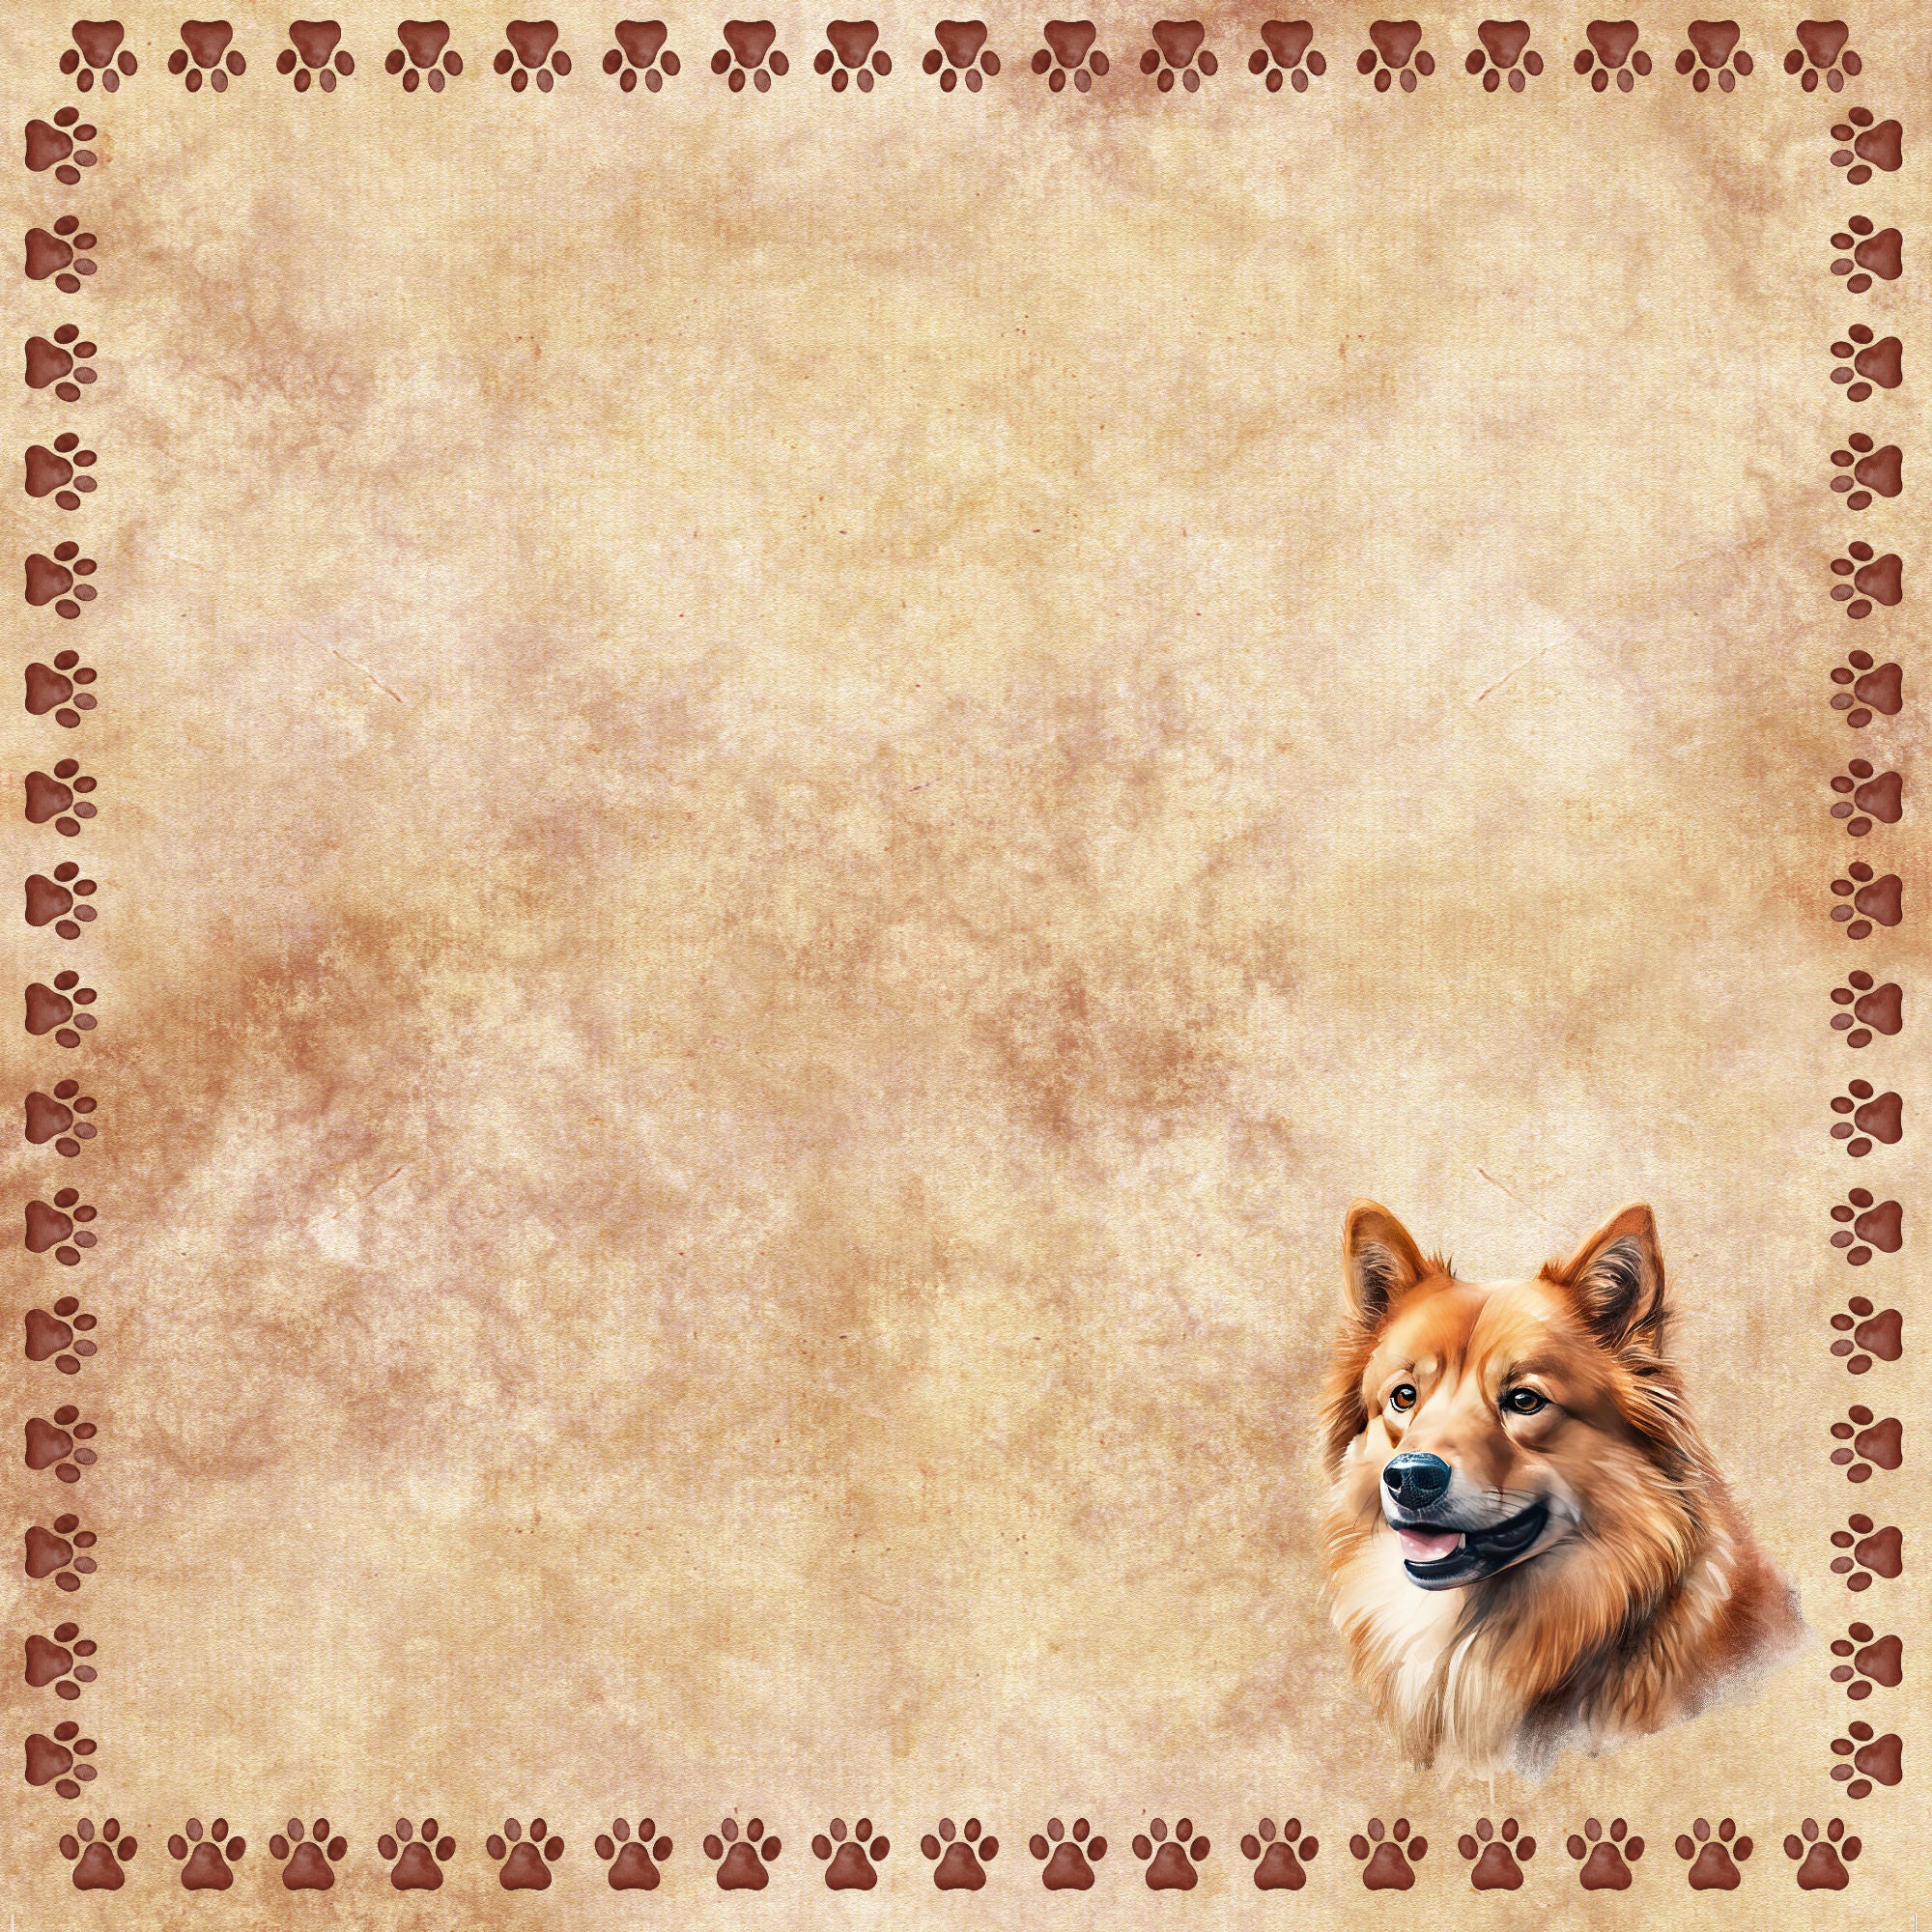 Dog Breeds Collection Corgi 12 x 12 Double-Sided Scrapbook Paper by SSC Designs